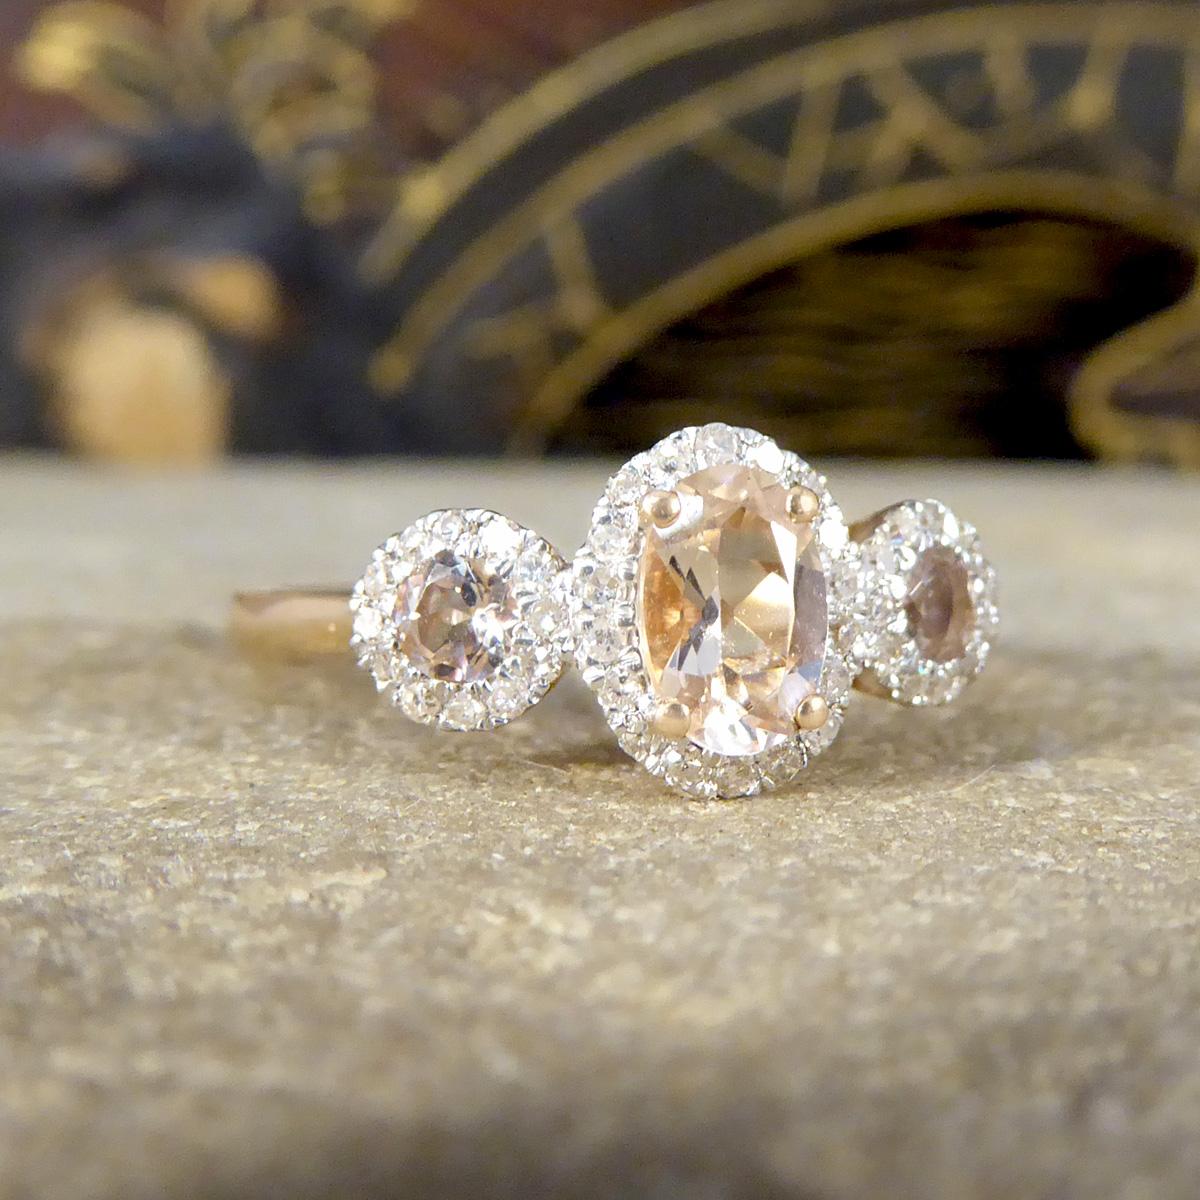 The morganite is one of the most romantic stones, it is known to be connected to the heart and believed to bring healing, compassion and promise to those who wear it and symbolises unconditional love. Coupled with the romantic notion of the three